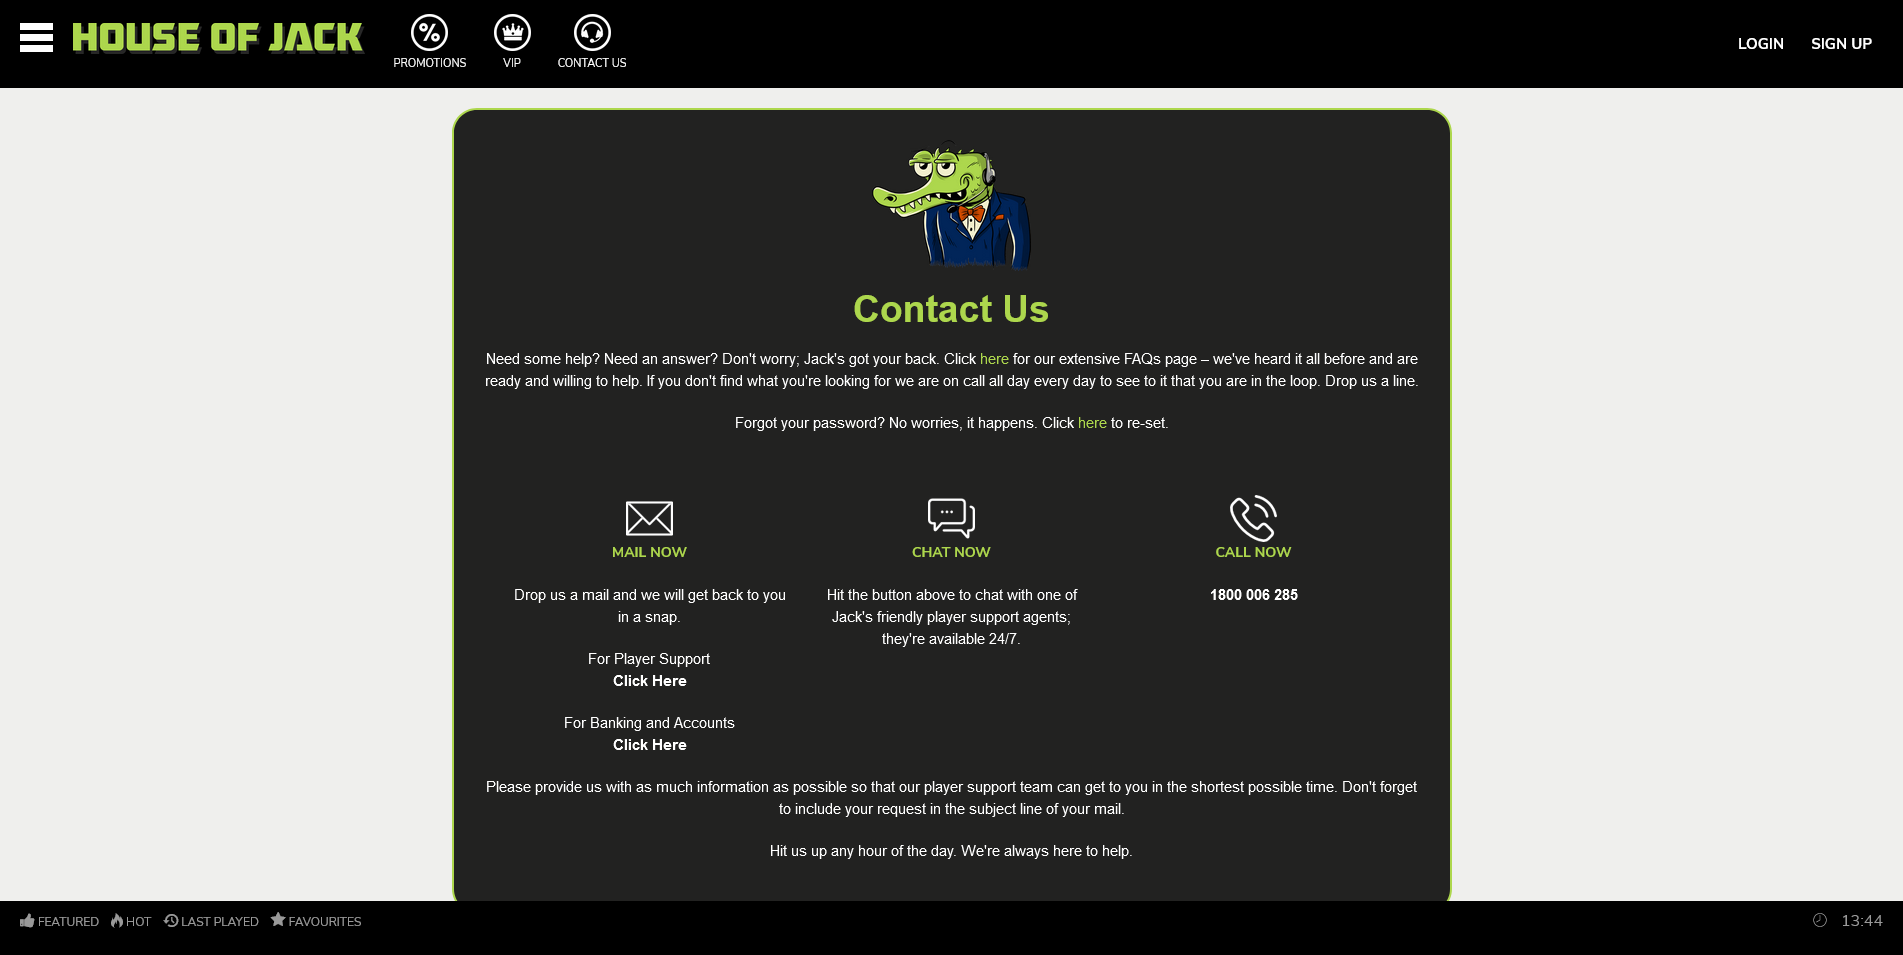 Screenshot of the House of Jack Casino contacts page